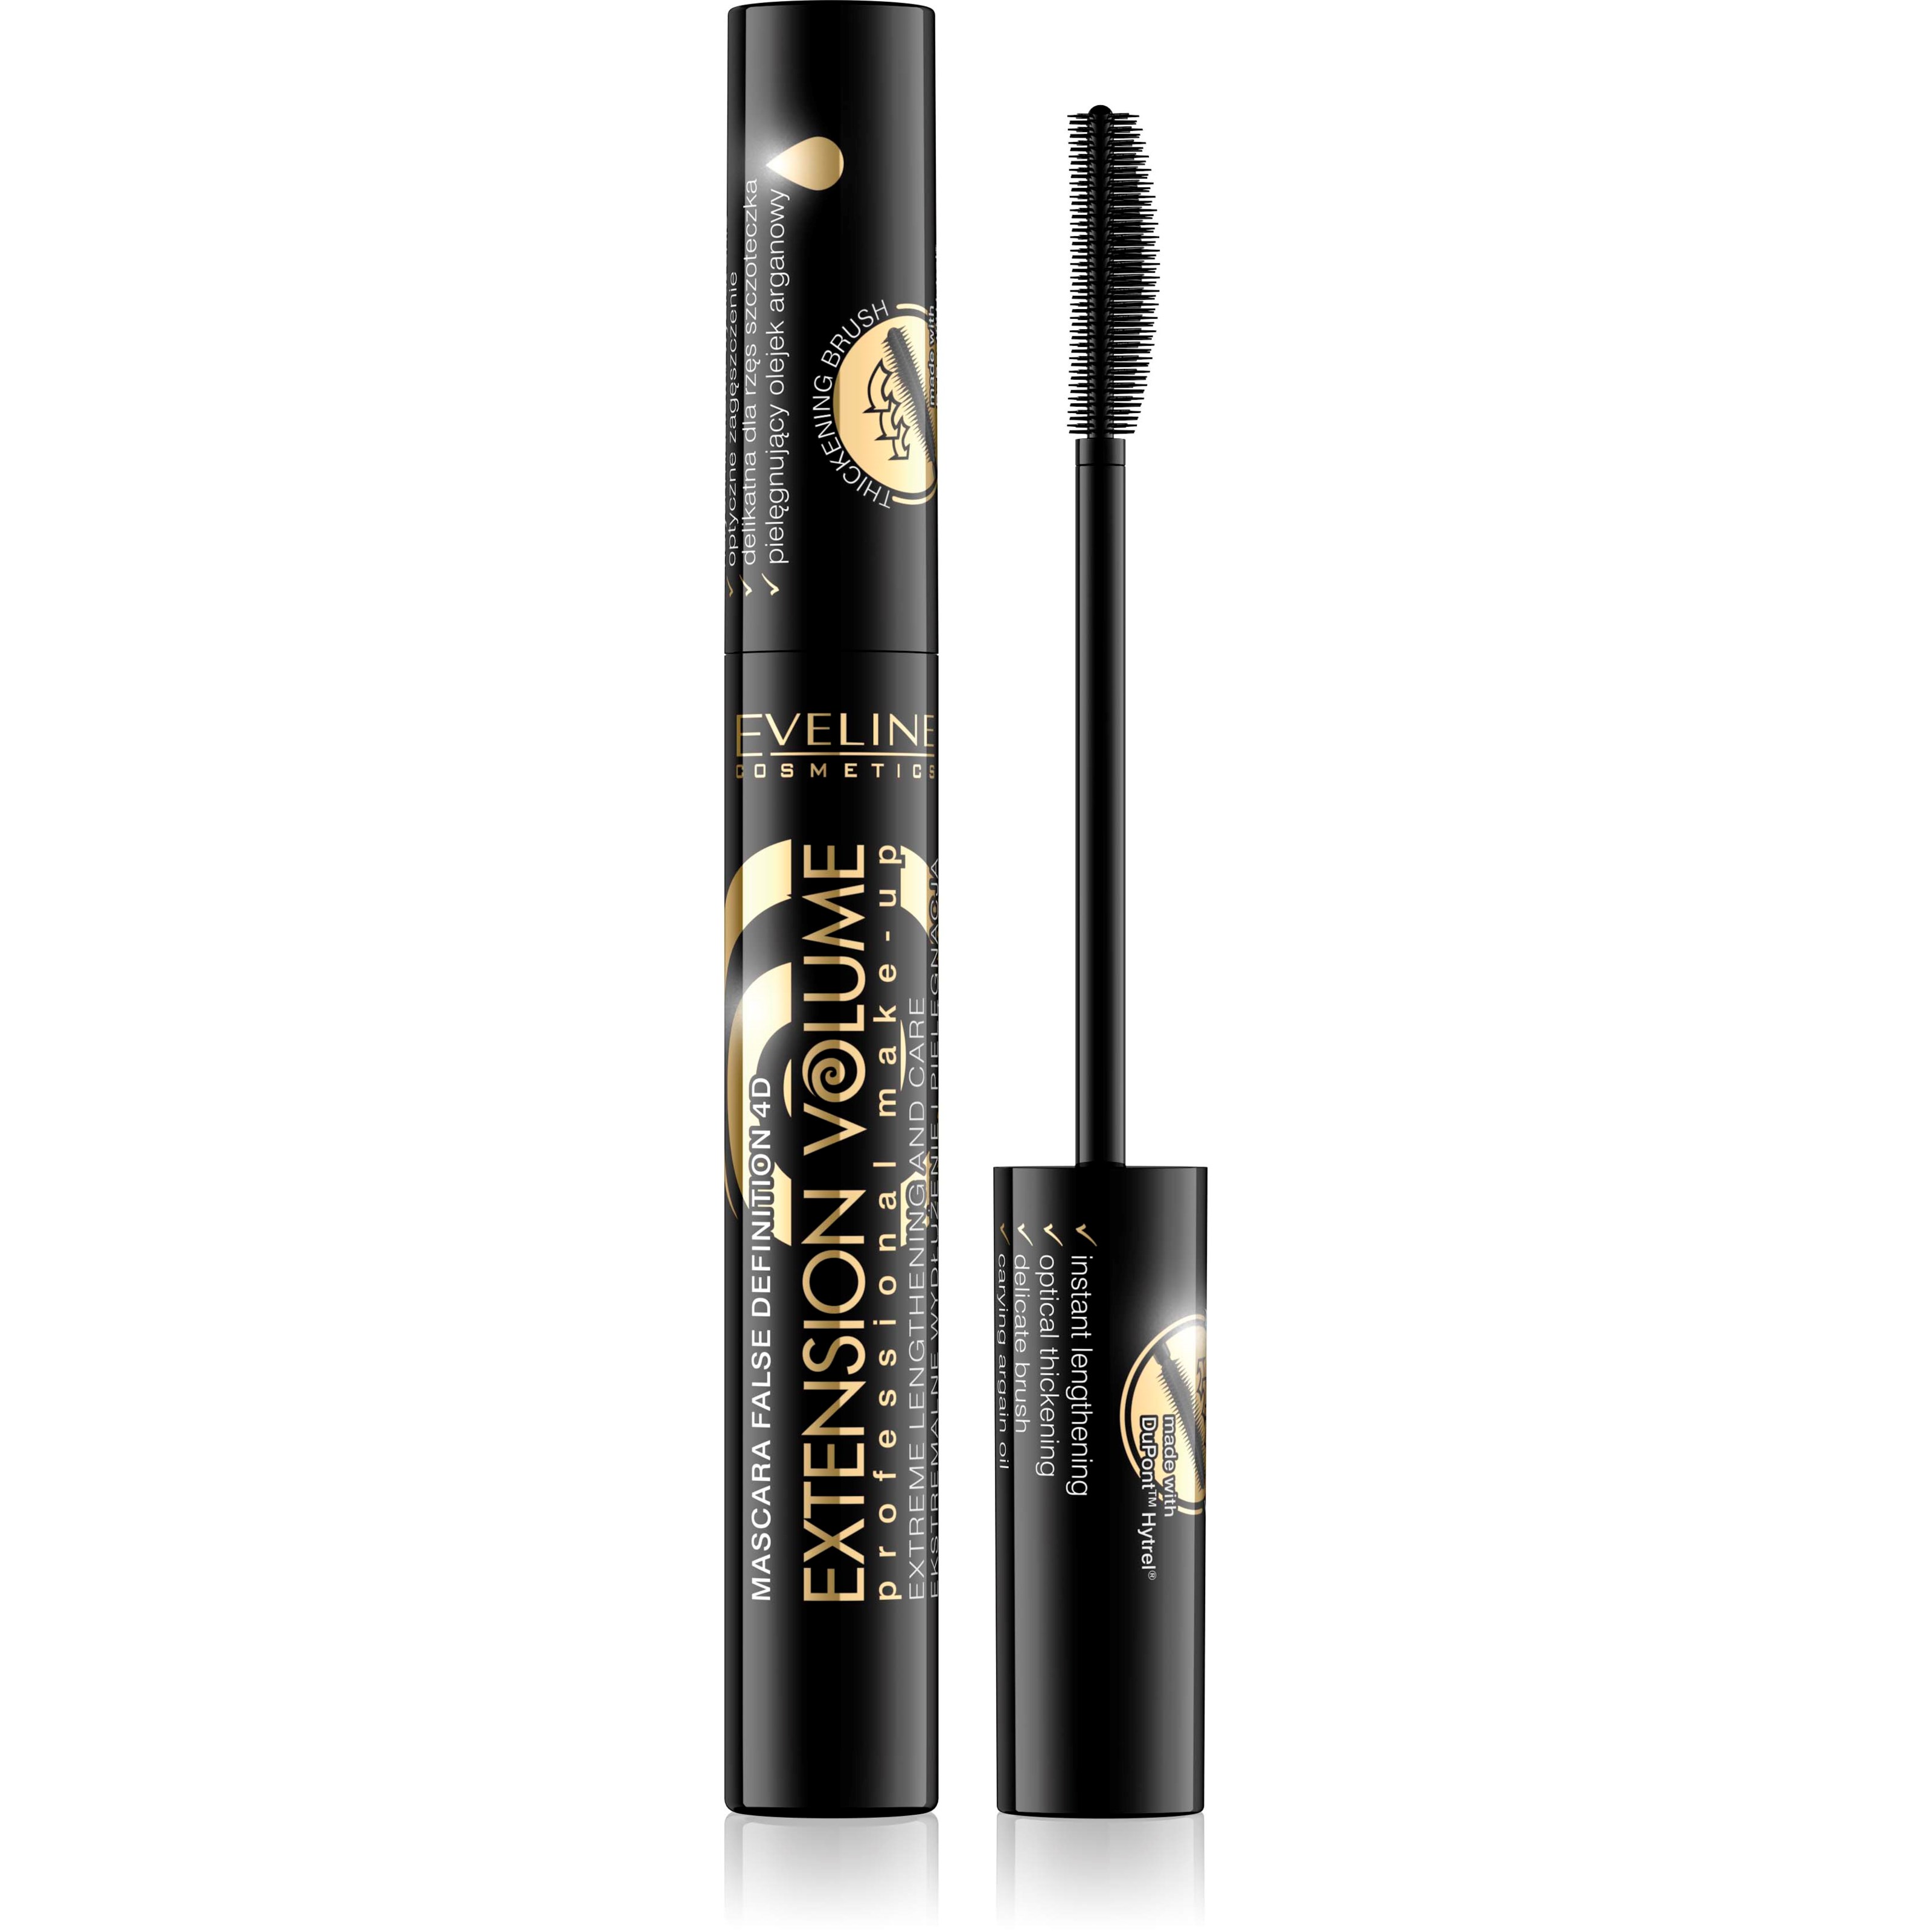 Eveline Cosmetics Mascara Extension Volume Lenght&Thickening 10 ml